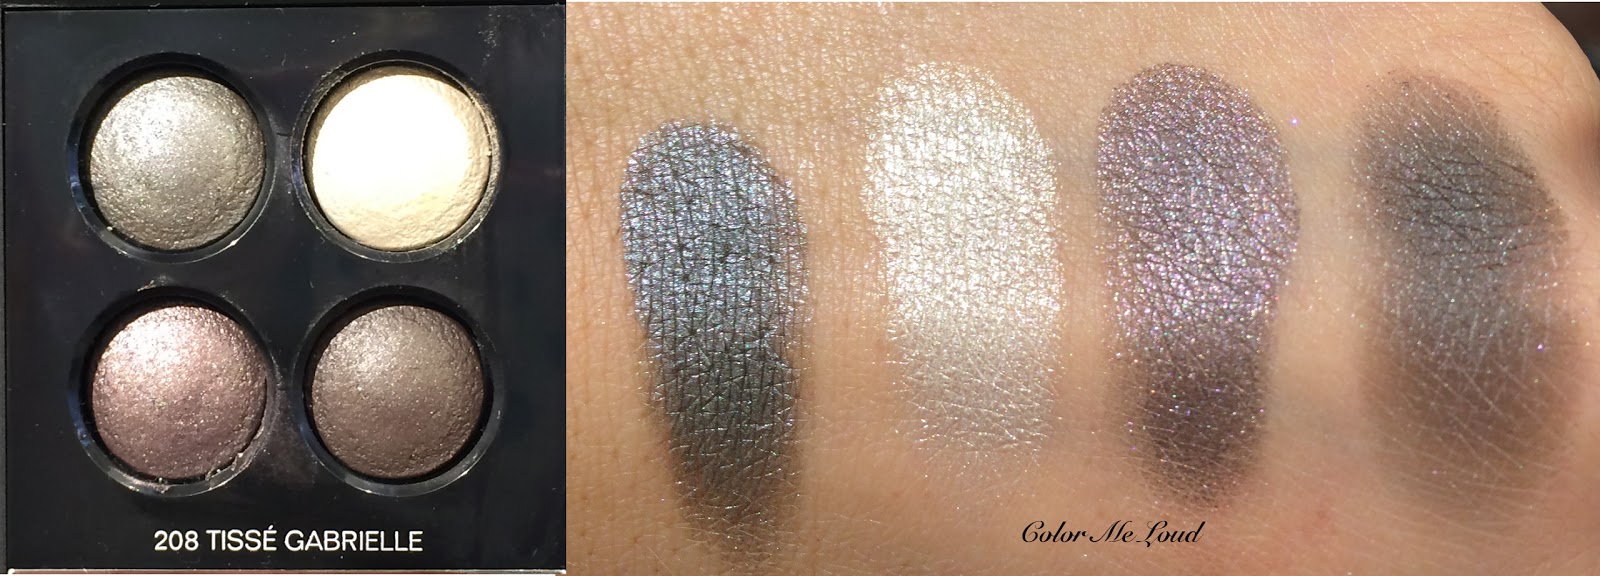 Chanel Les 4 Ombres Collection for Spring 2014, Swatches of all